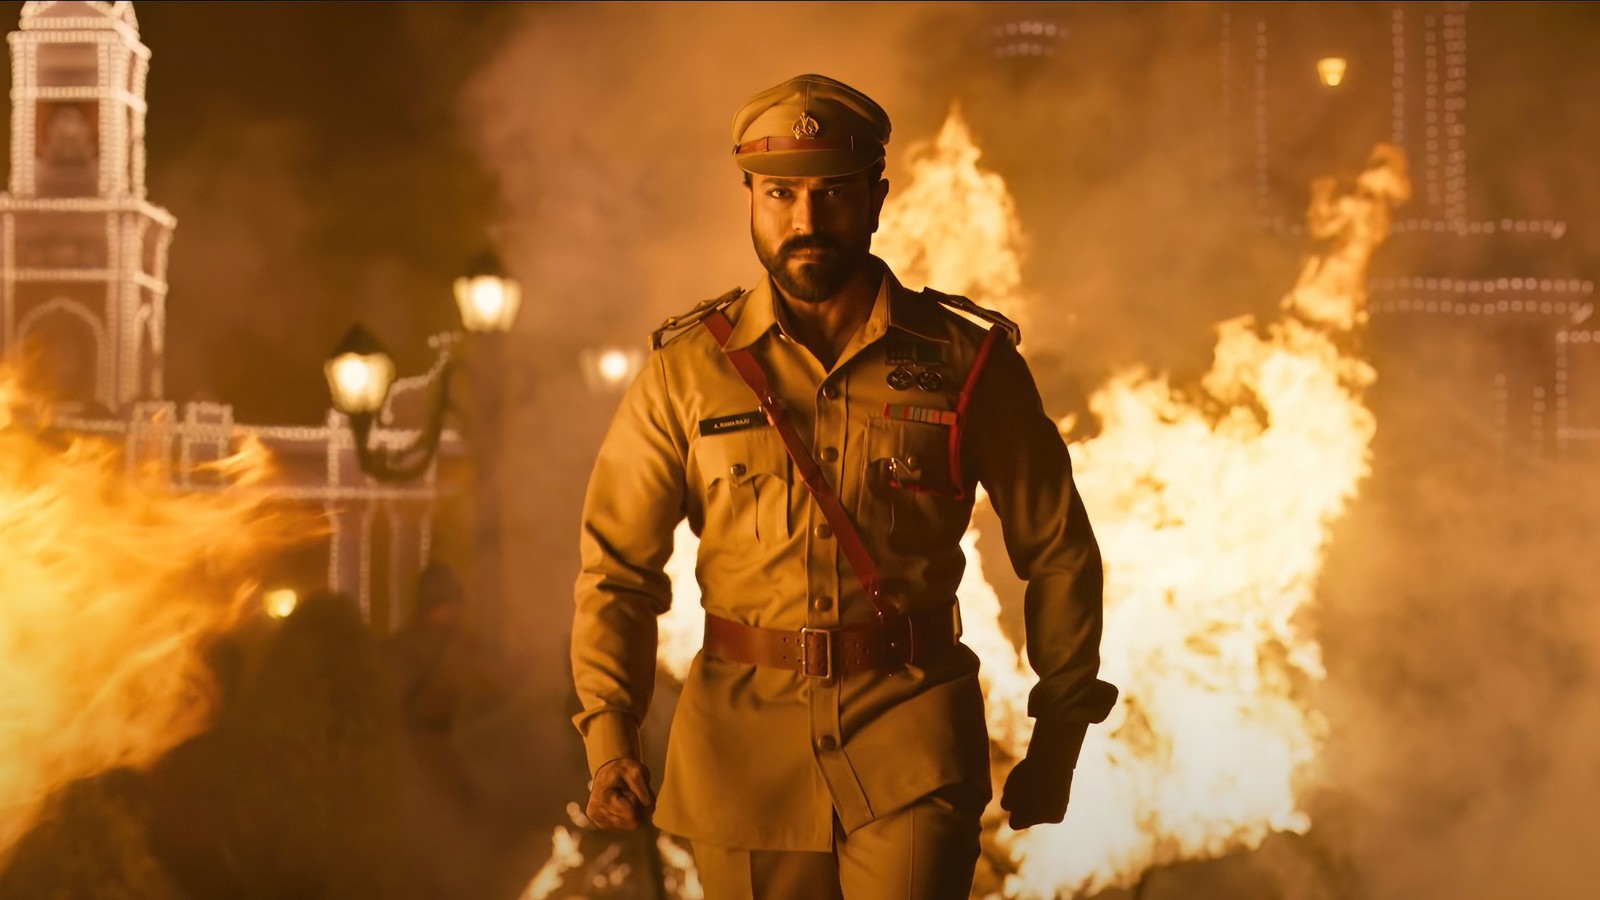 RRR movie on Netflix: The wild Indian blockbuster has a troubling